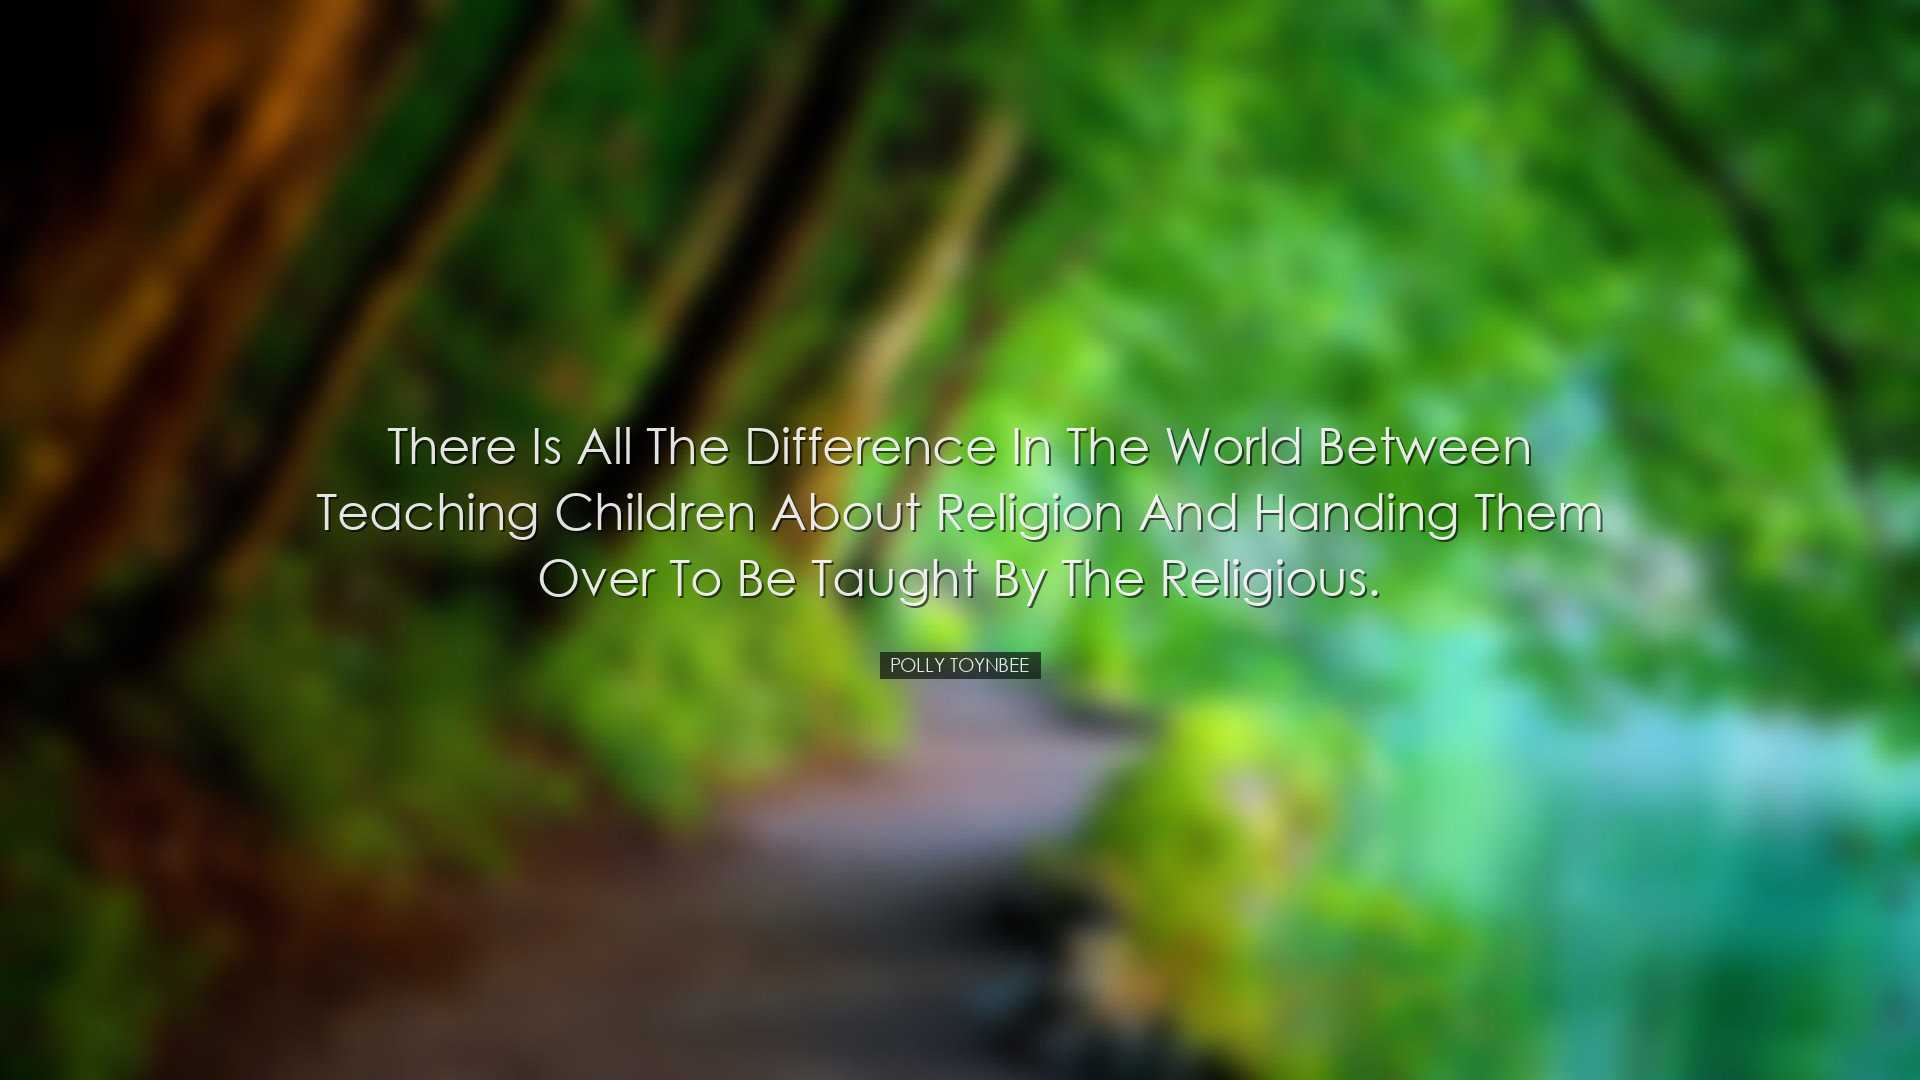 There is all the difference in the world between teaching children